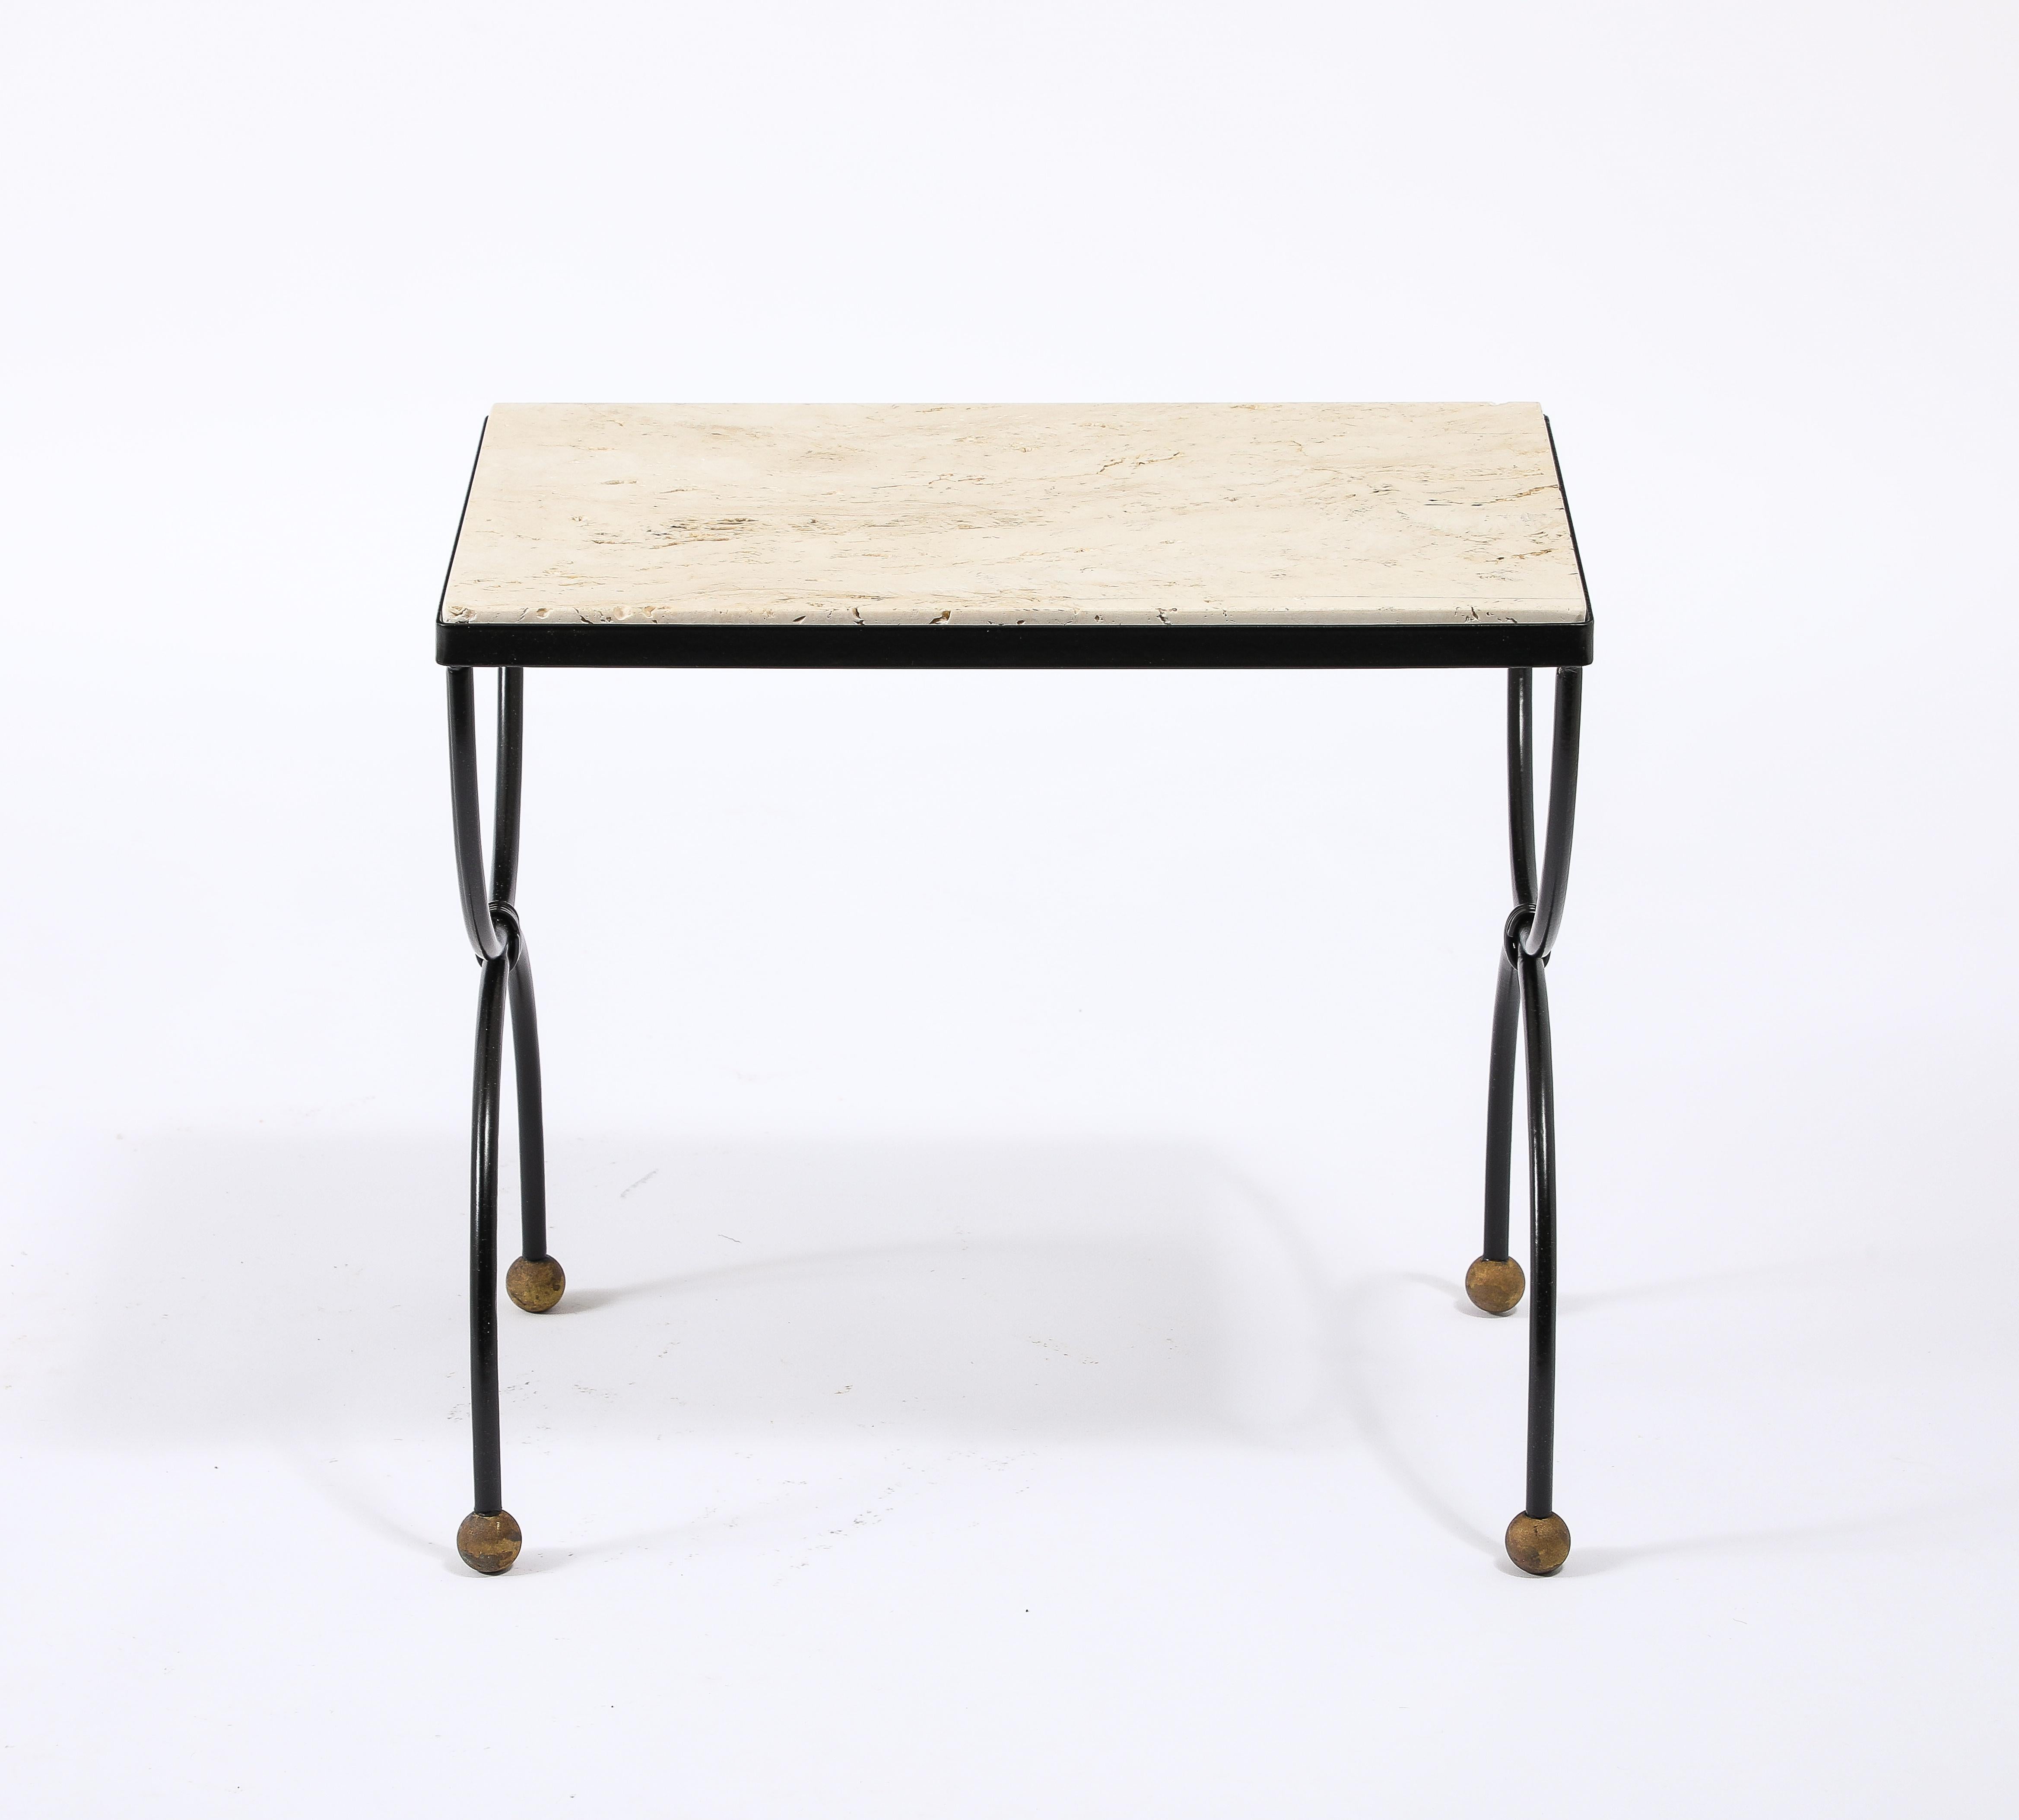 Black enameled steel end table with brass feet and a travertine top.
